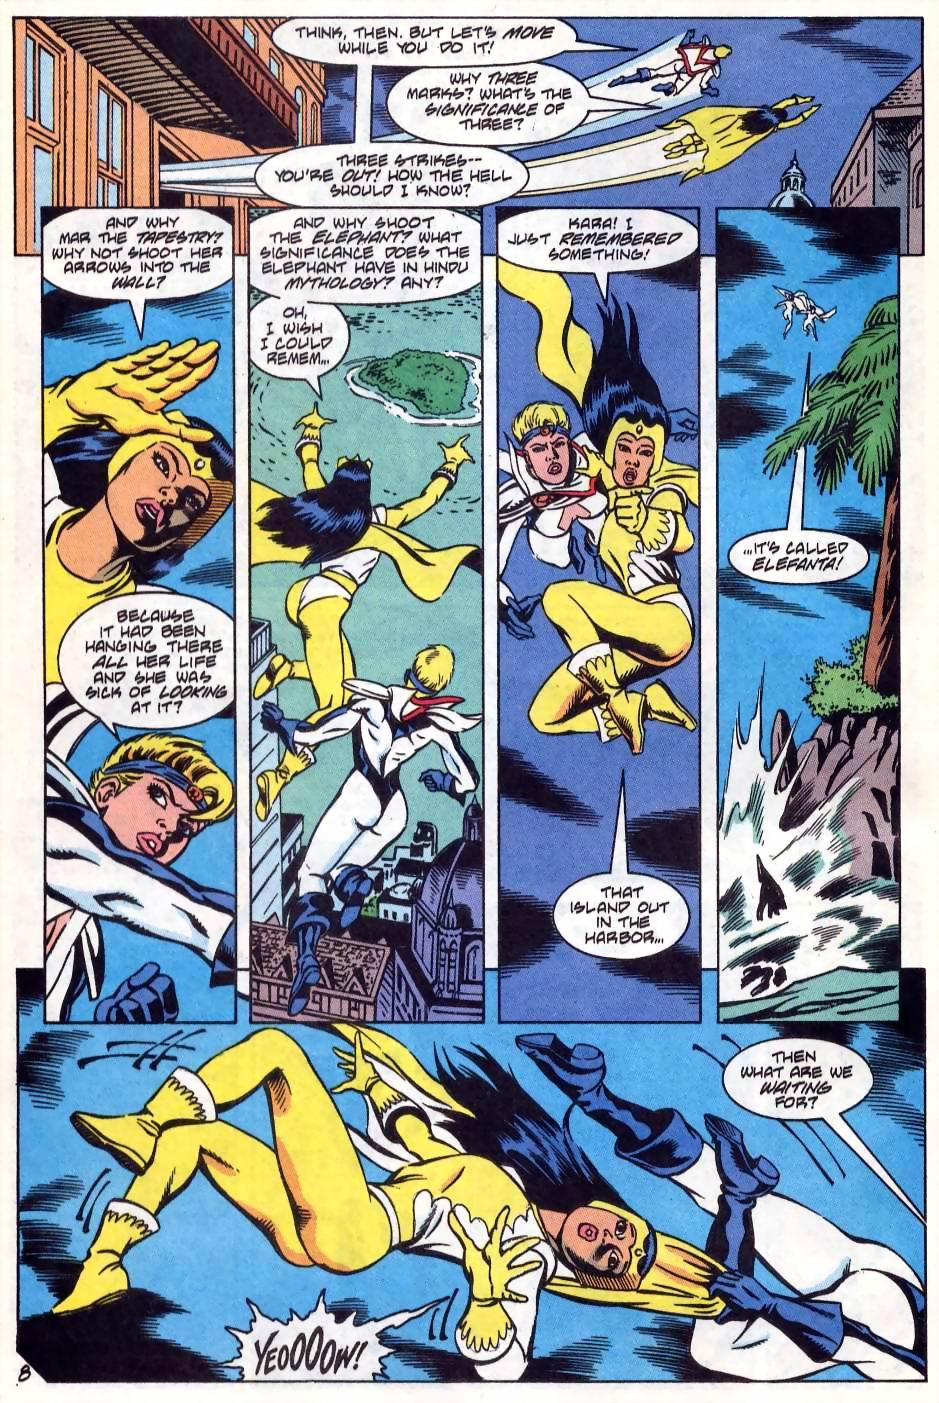 Justice League International (1993) 52 Page 8